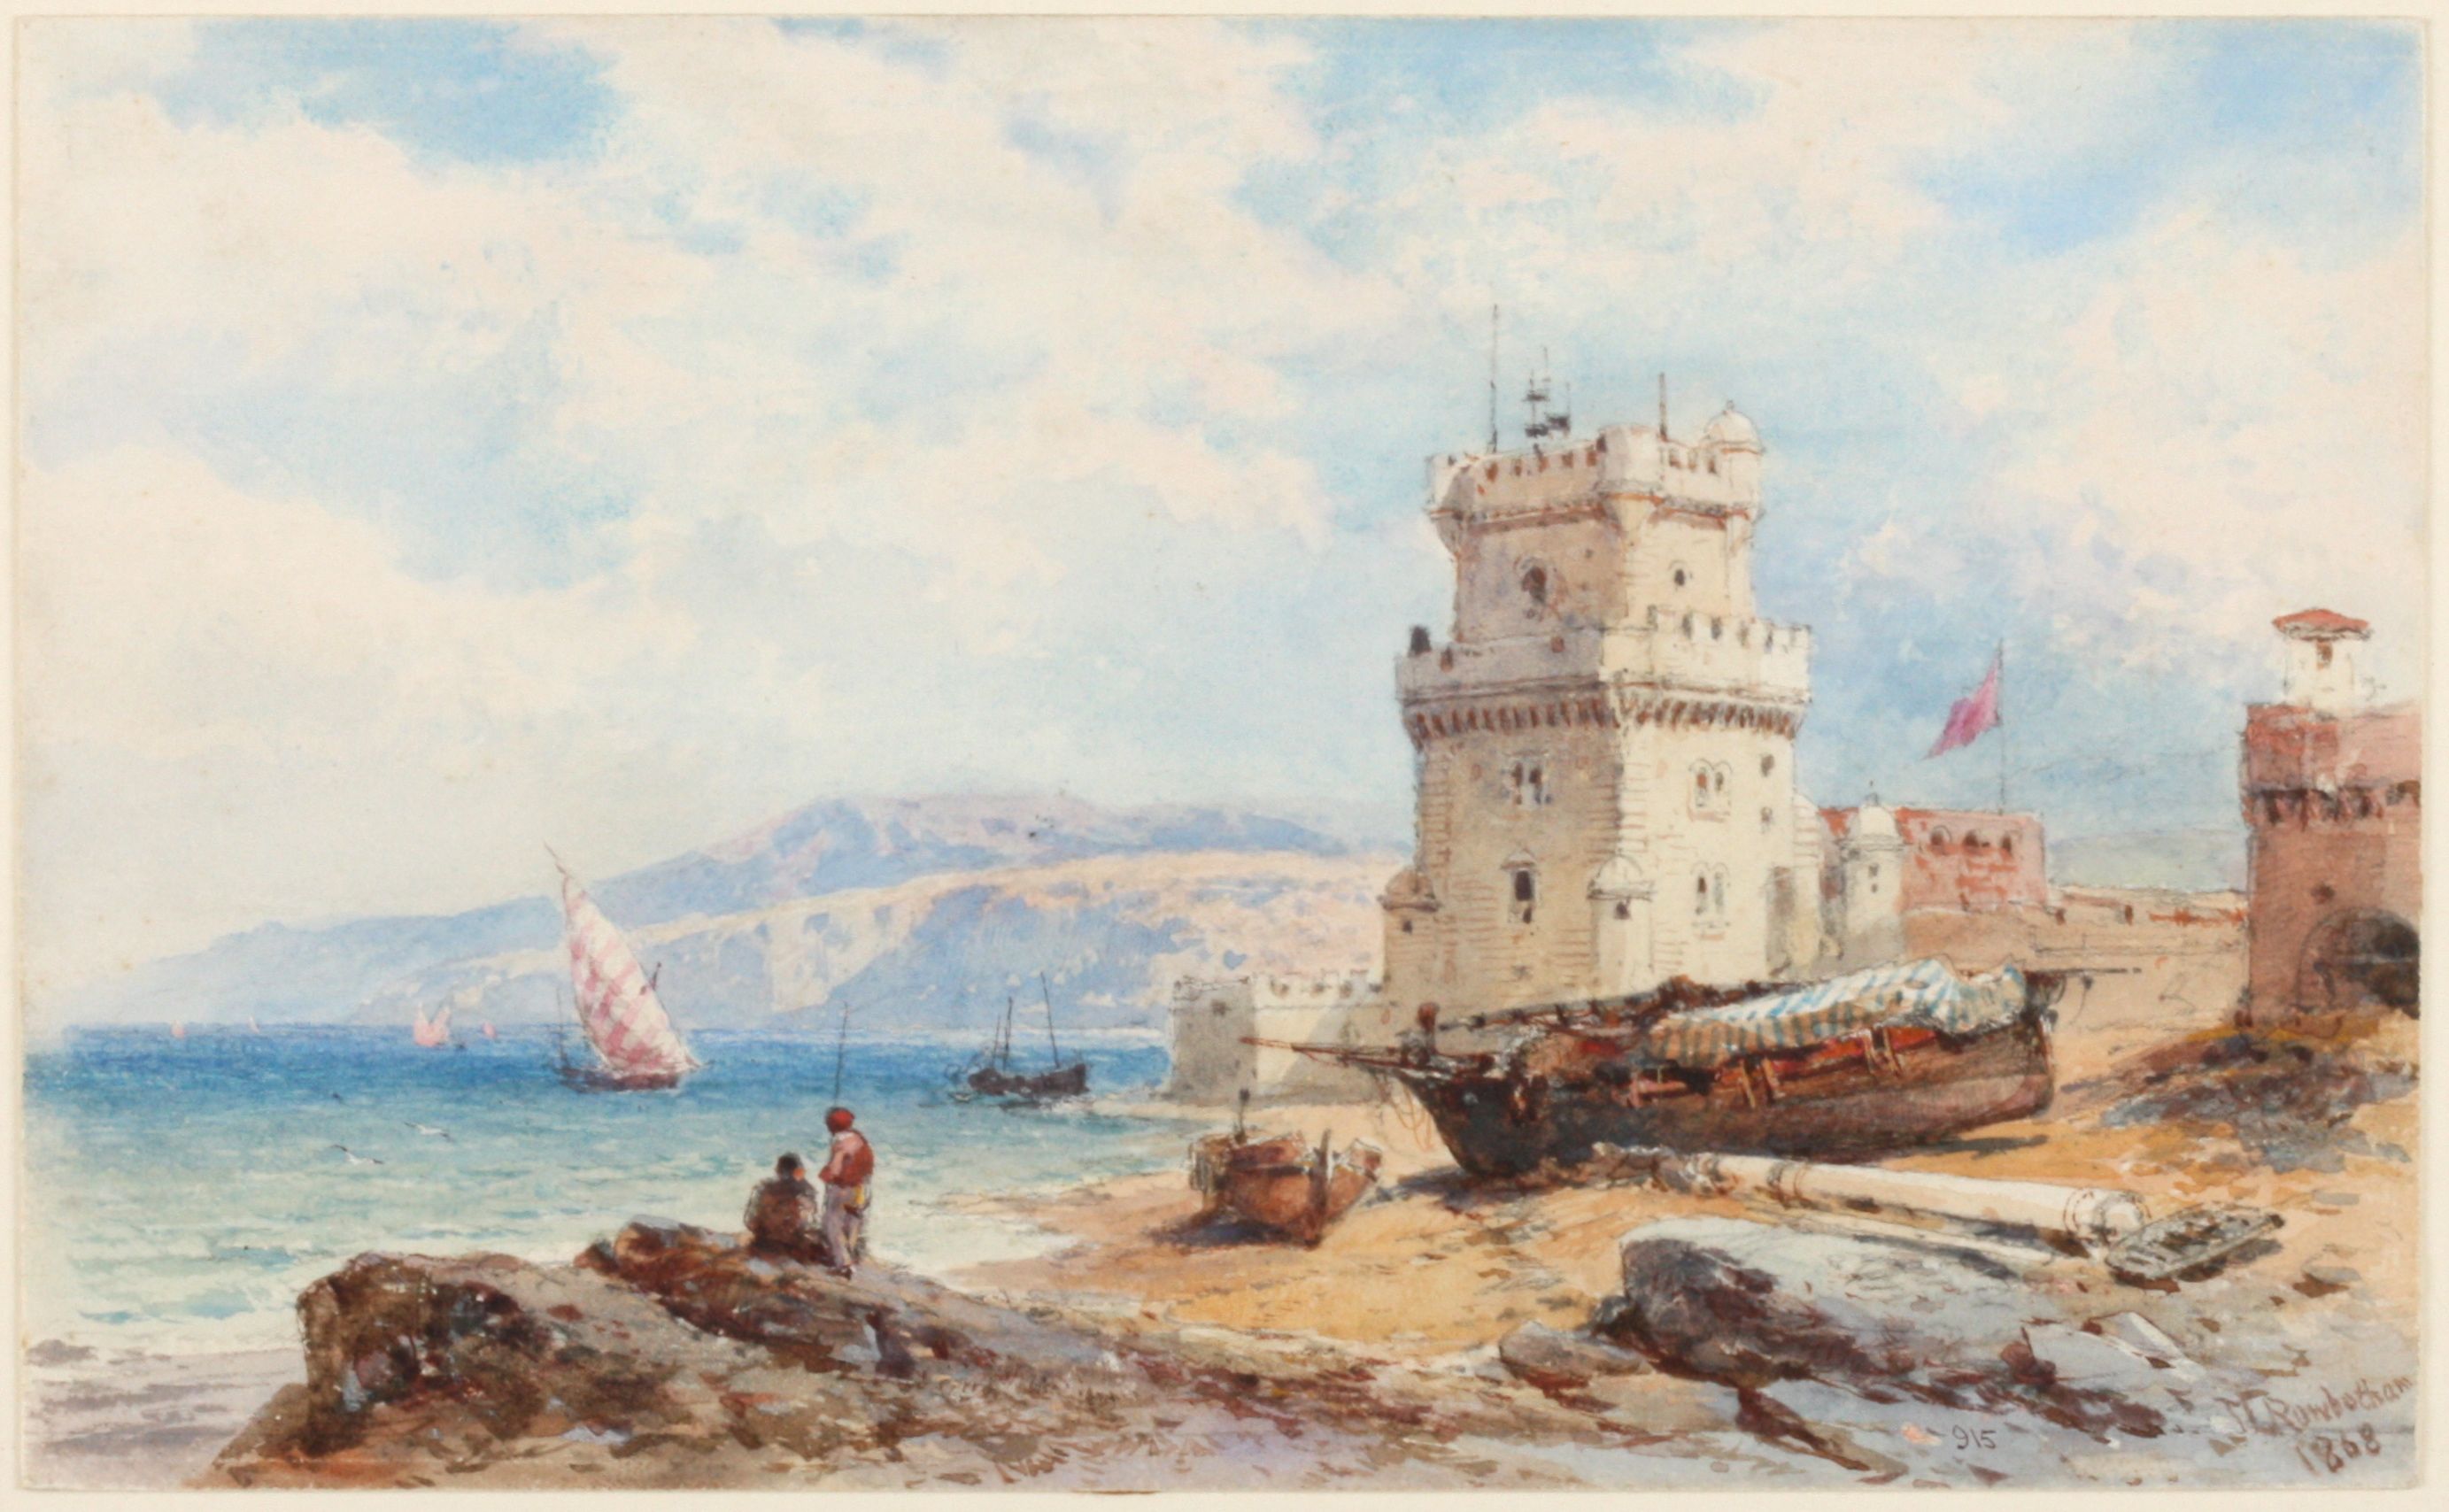 Thomas Leeson Rowbotham (British 1783-1853)
'Fort of Belem at the mouth of the Tagus outside Lisbon'